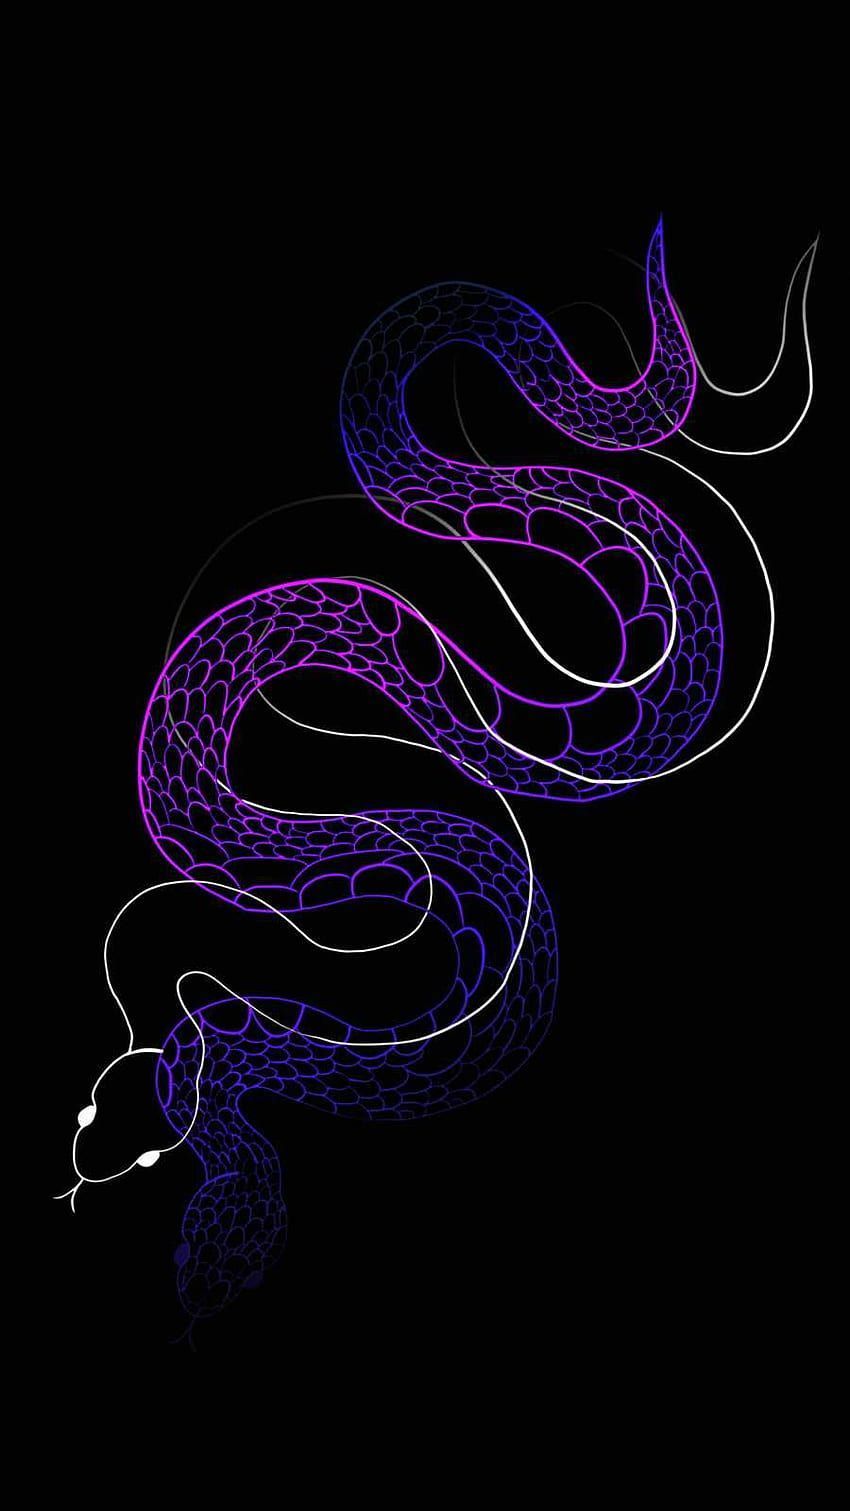 A purple snake with blue lines on black background - Snake